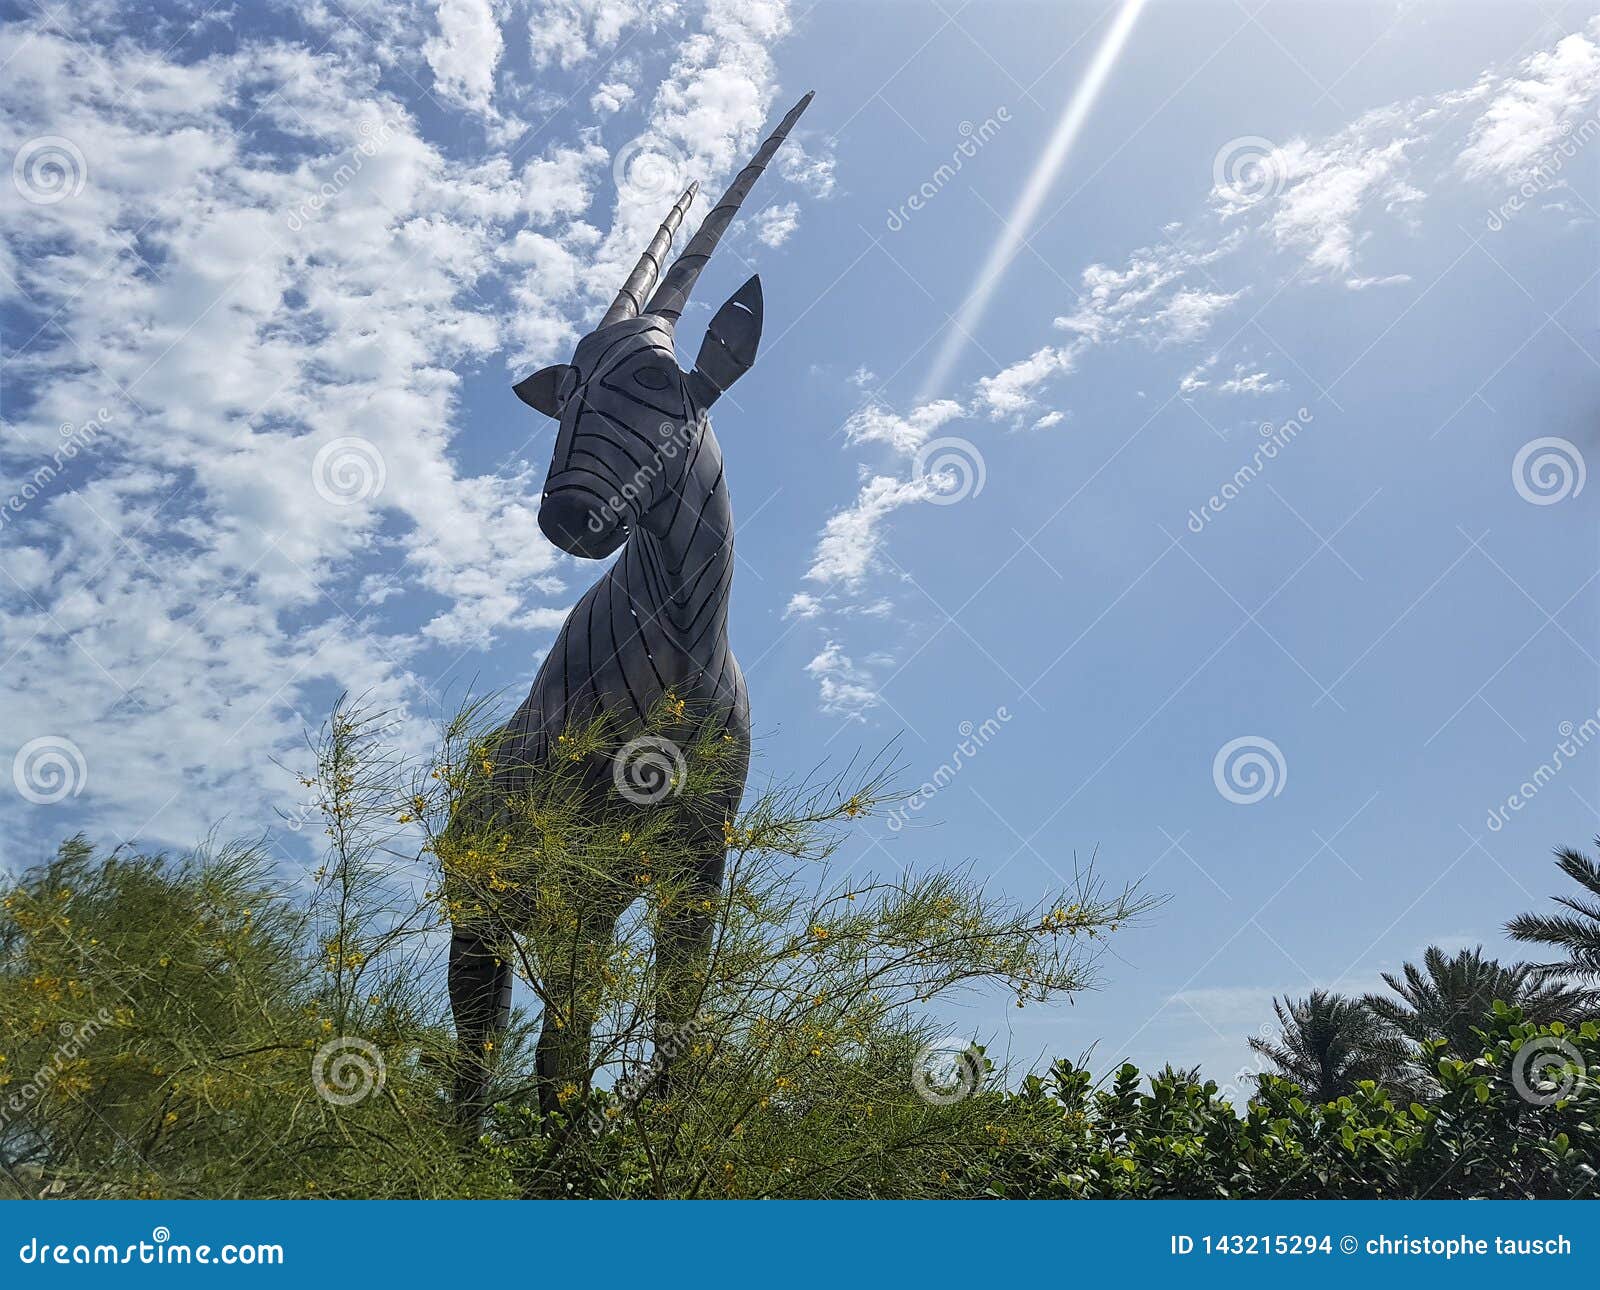 Picture of a Giant Oryx, Depicting the National Animal of Qatar the  Stainless Steel Sculpture Weigh More Than 12-tonnes and Stand Editorial  Stock Image - Image of giant, steel: 143215294